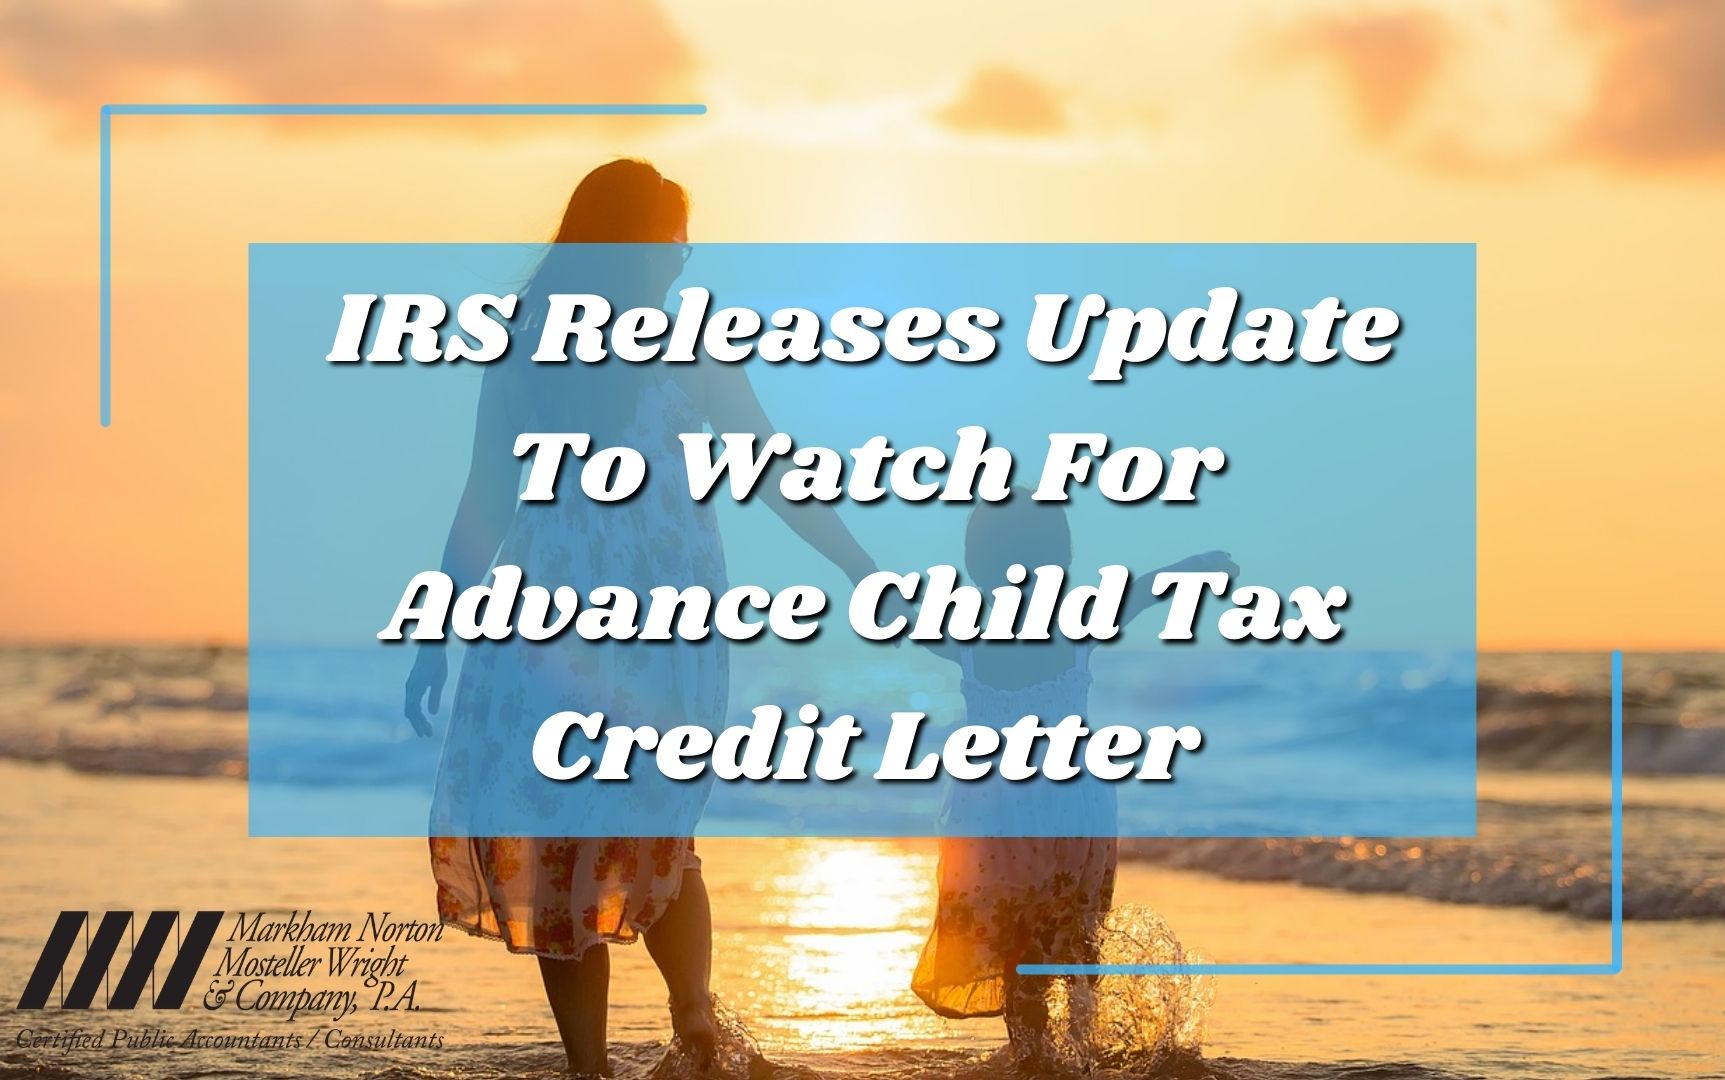 IRS updated child tax credit letter